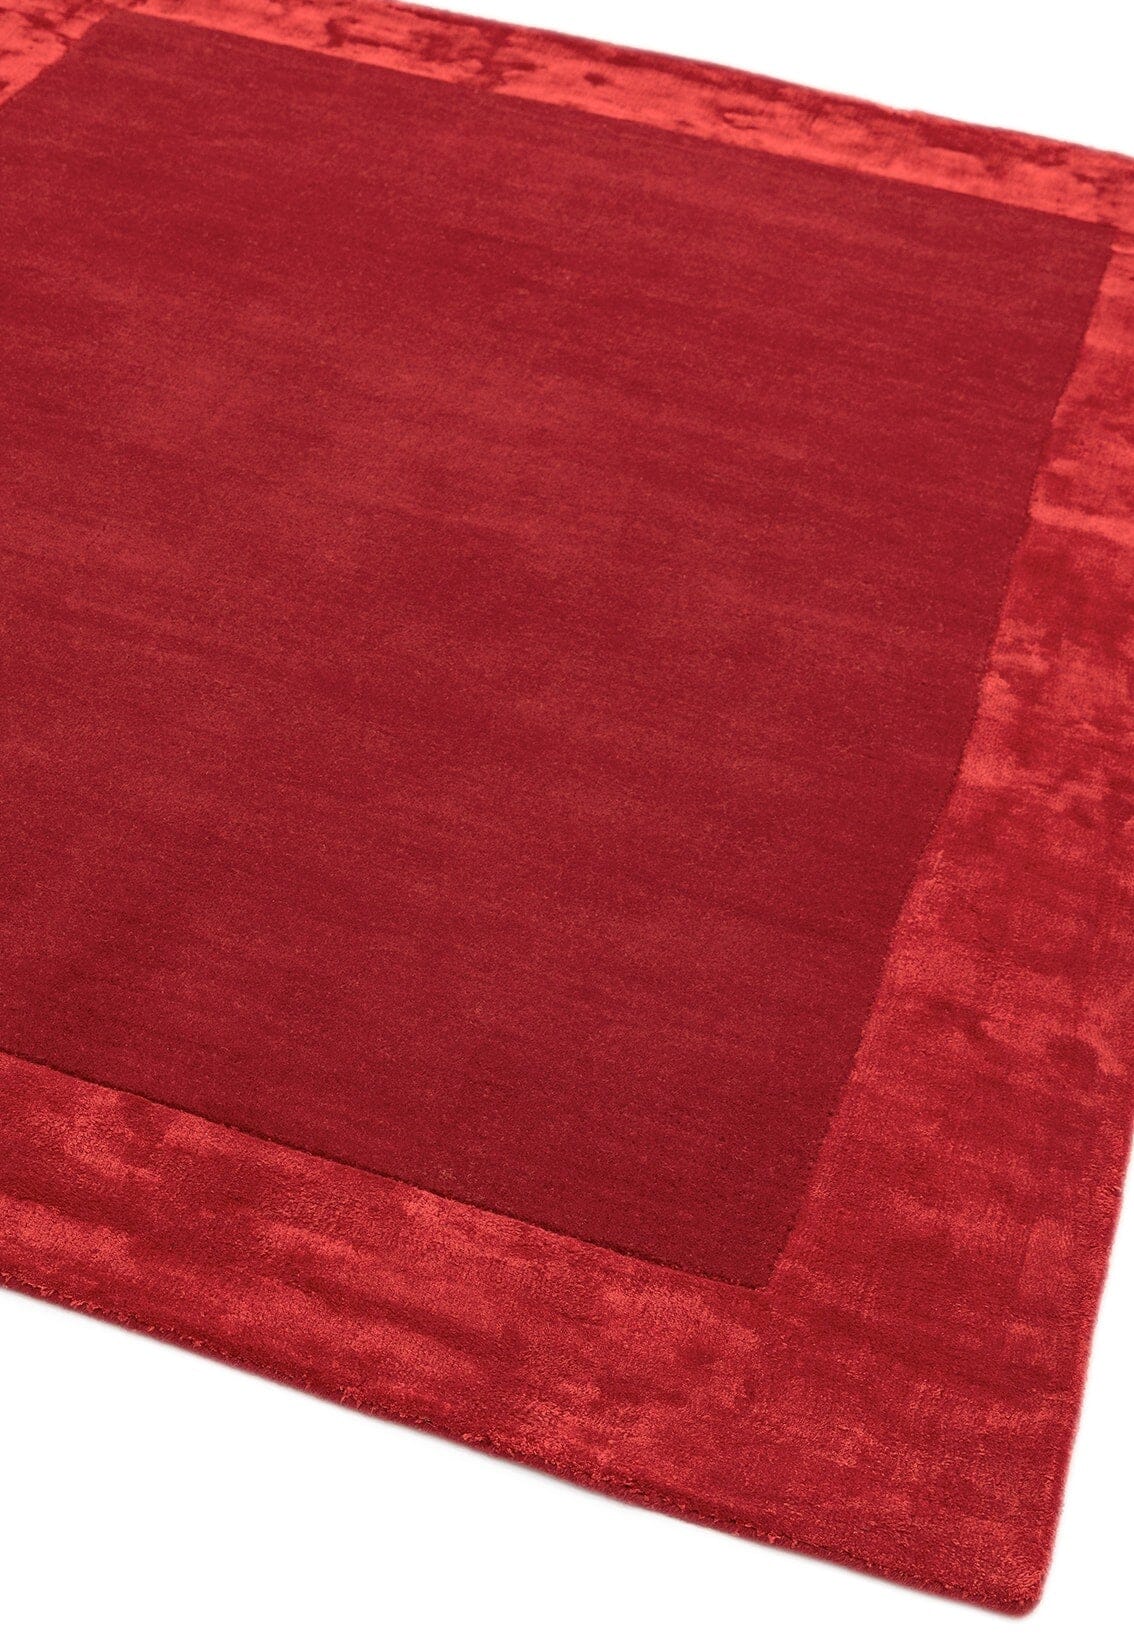  Asiatic Carpets-Asiatic Carpets Ascot Hand Woven Rug Red - 120 x 170cm-Red 621 